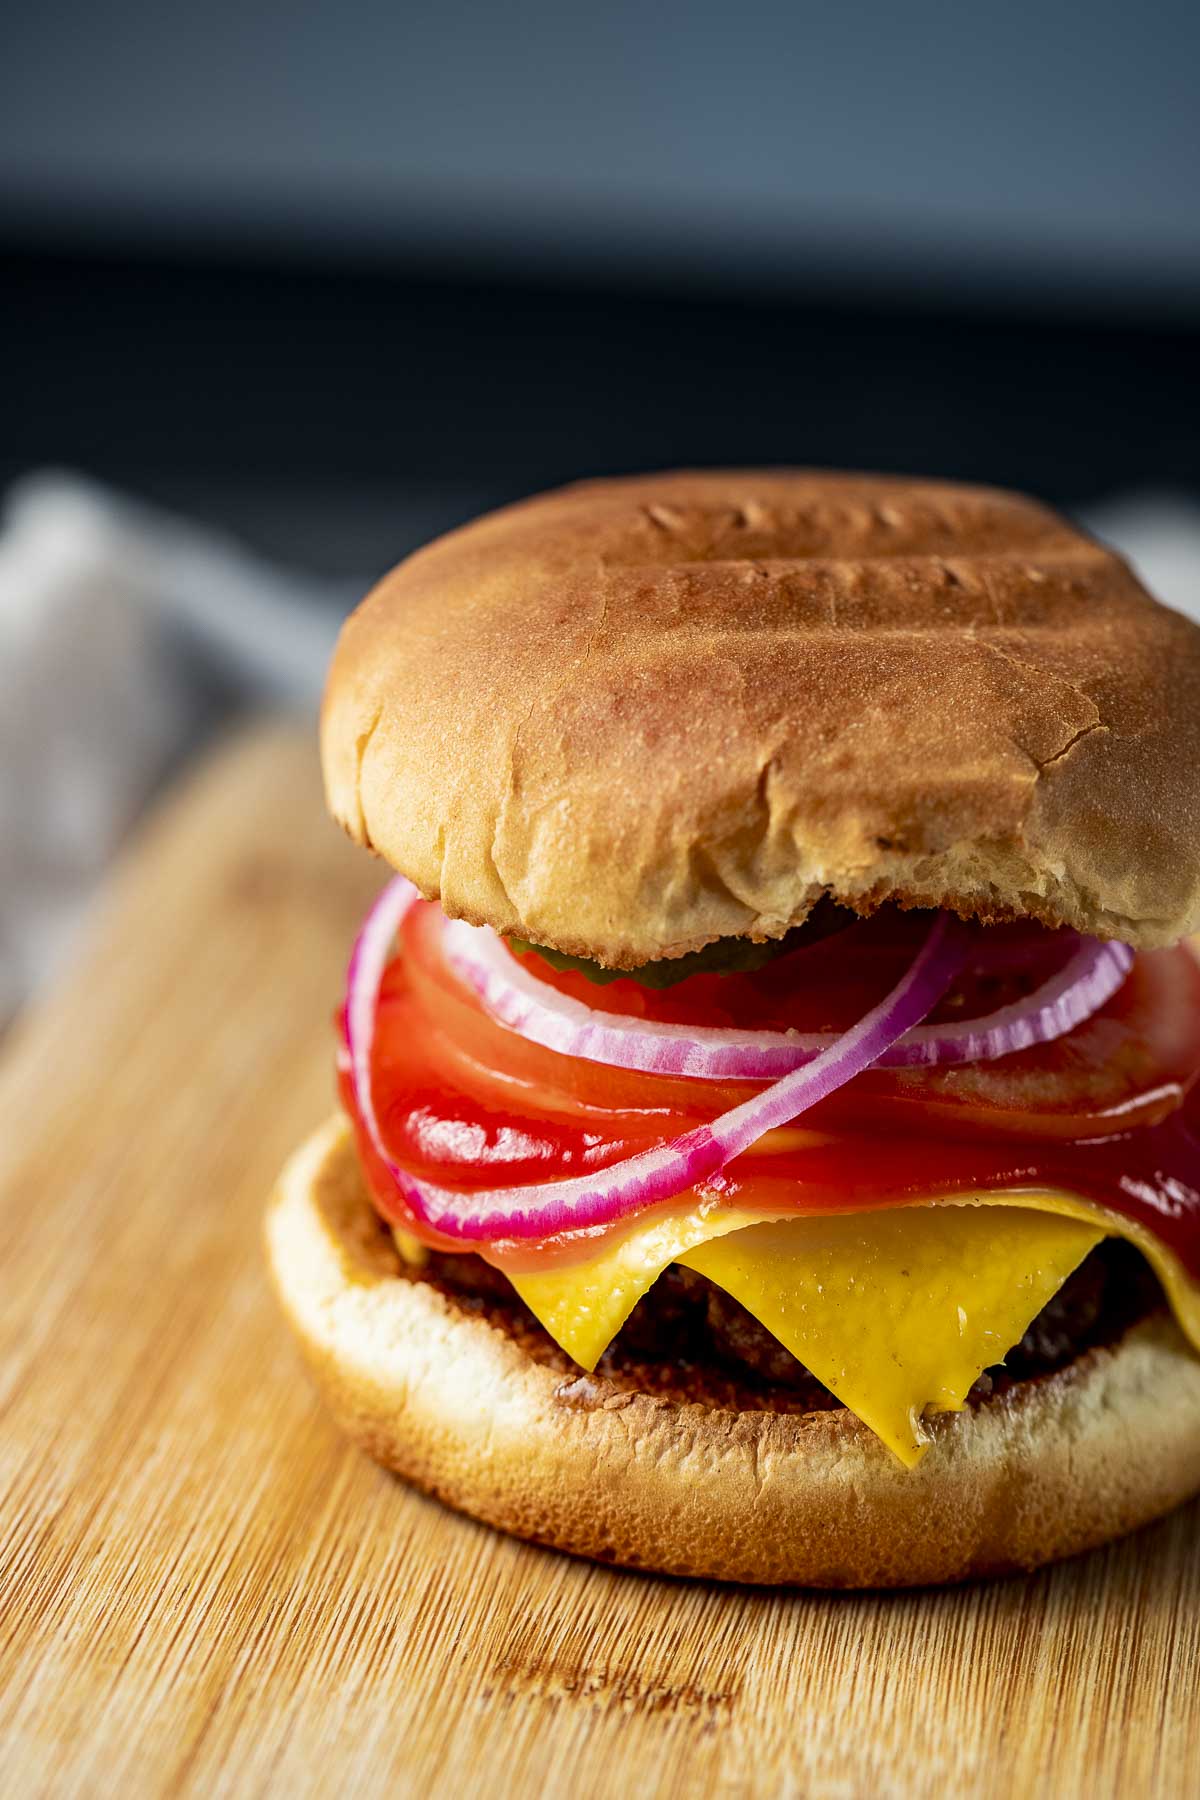 Side view of a hamburger with cheese, tomato and red onion on top.